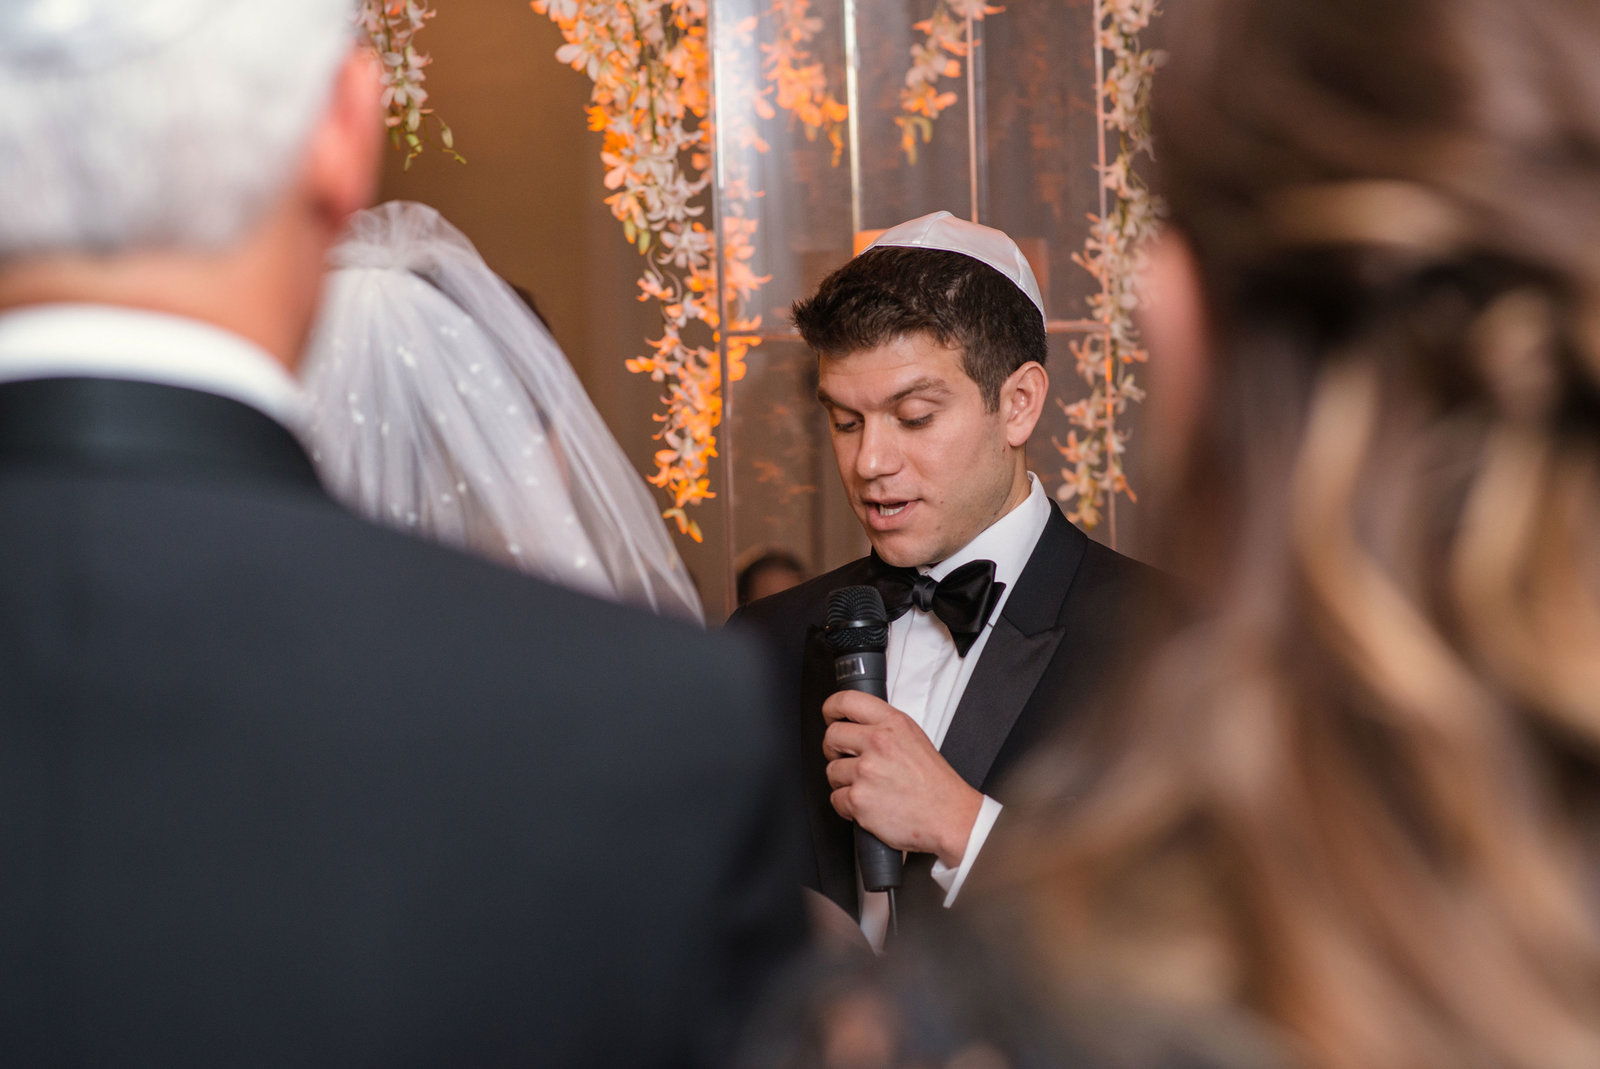 groom reciting his vows during ceremony at Glen Head Country Club